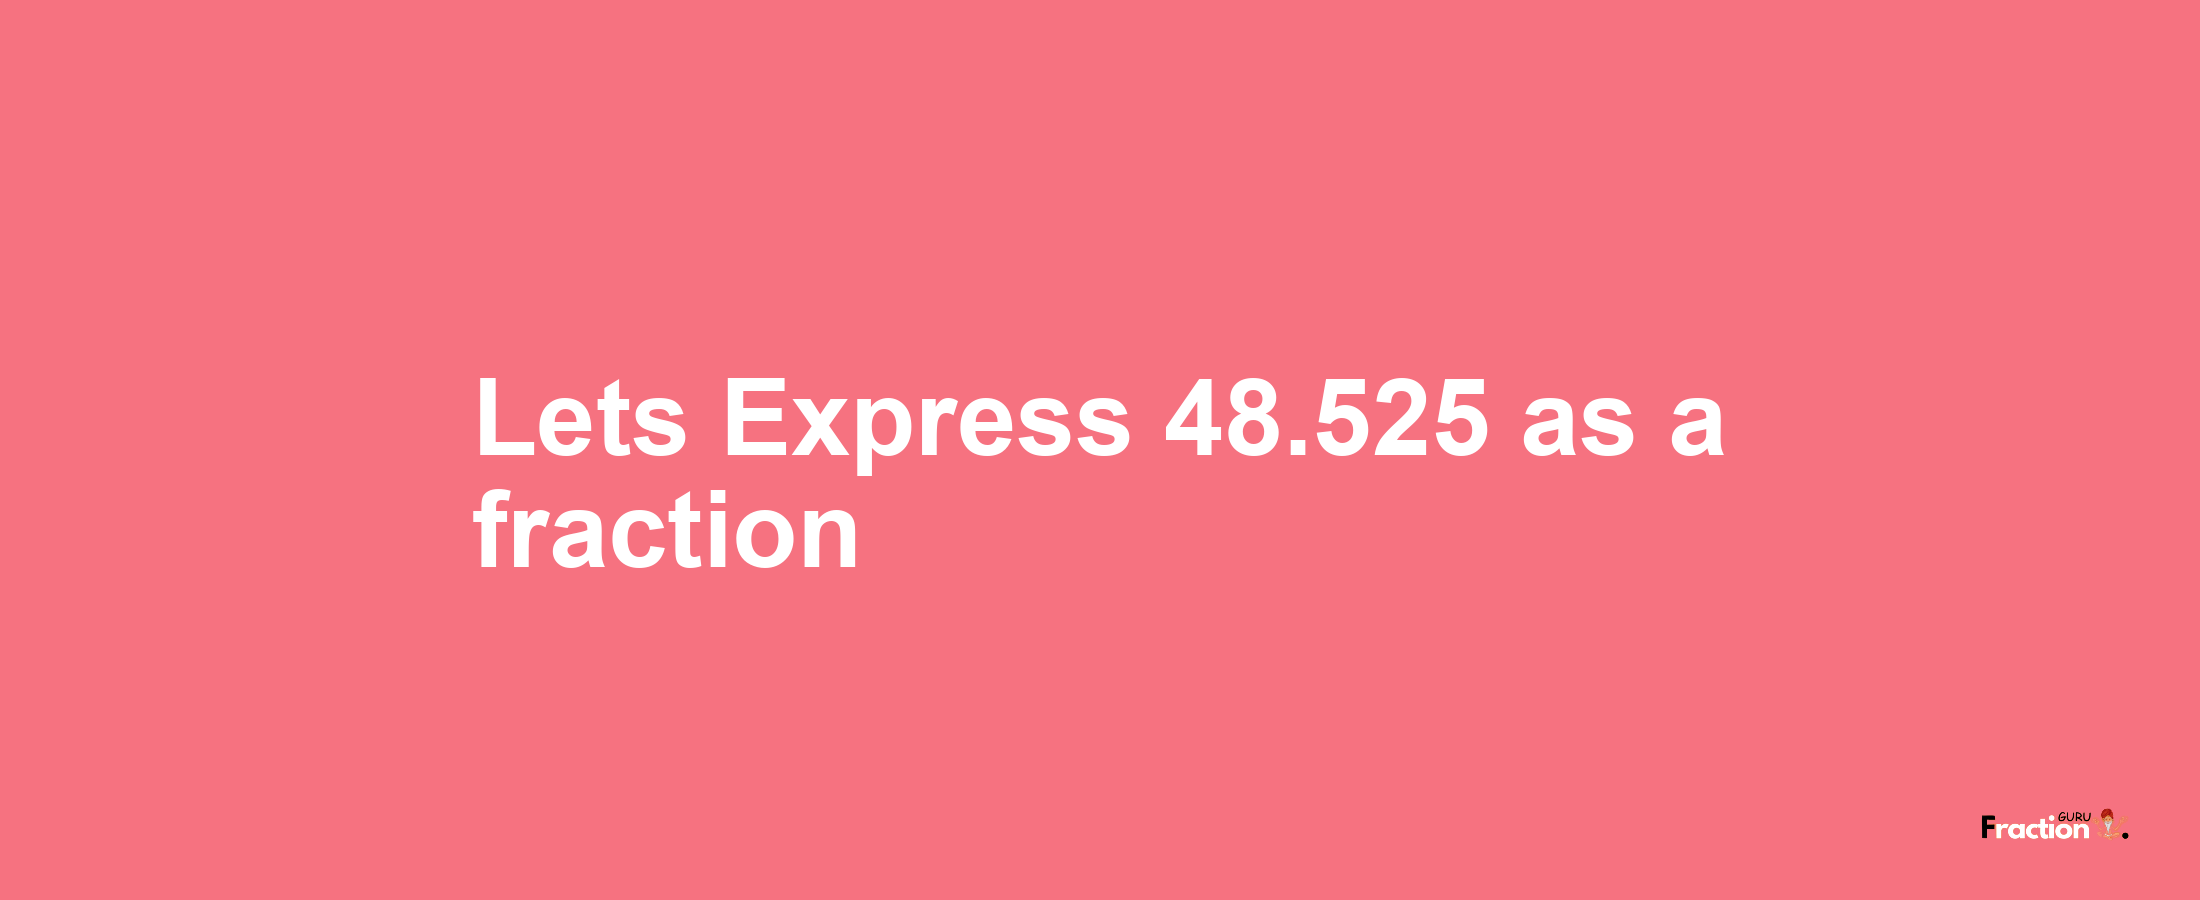 Lets Express 48.525 as afraction